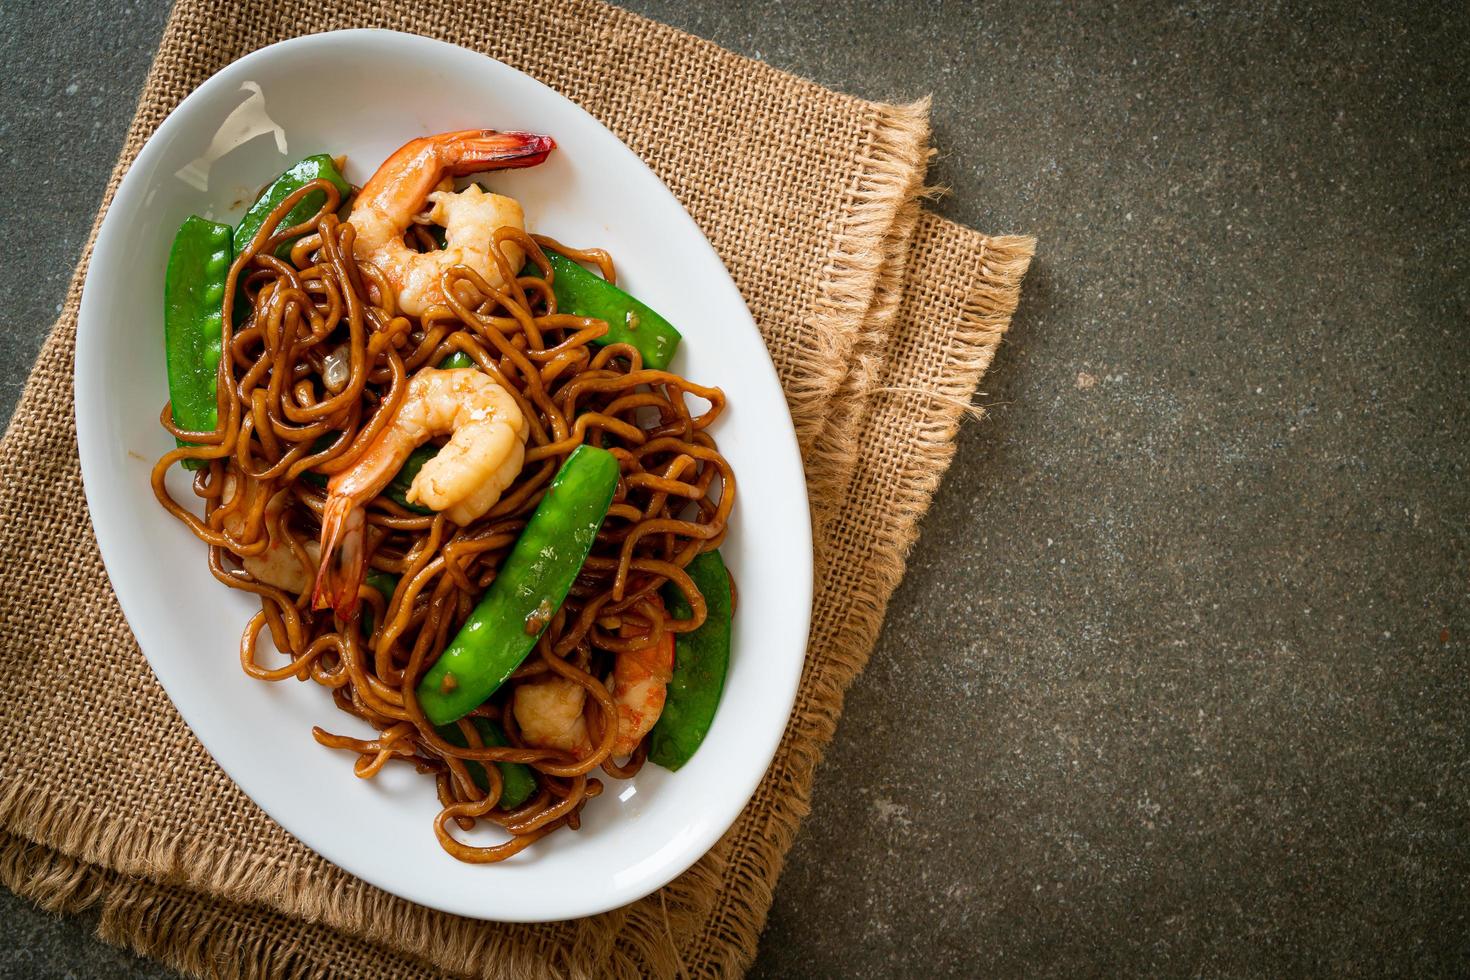 Stir-fried yakisoba noodles with green peas and shrimps - Asian food style photo